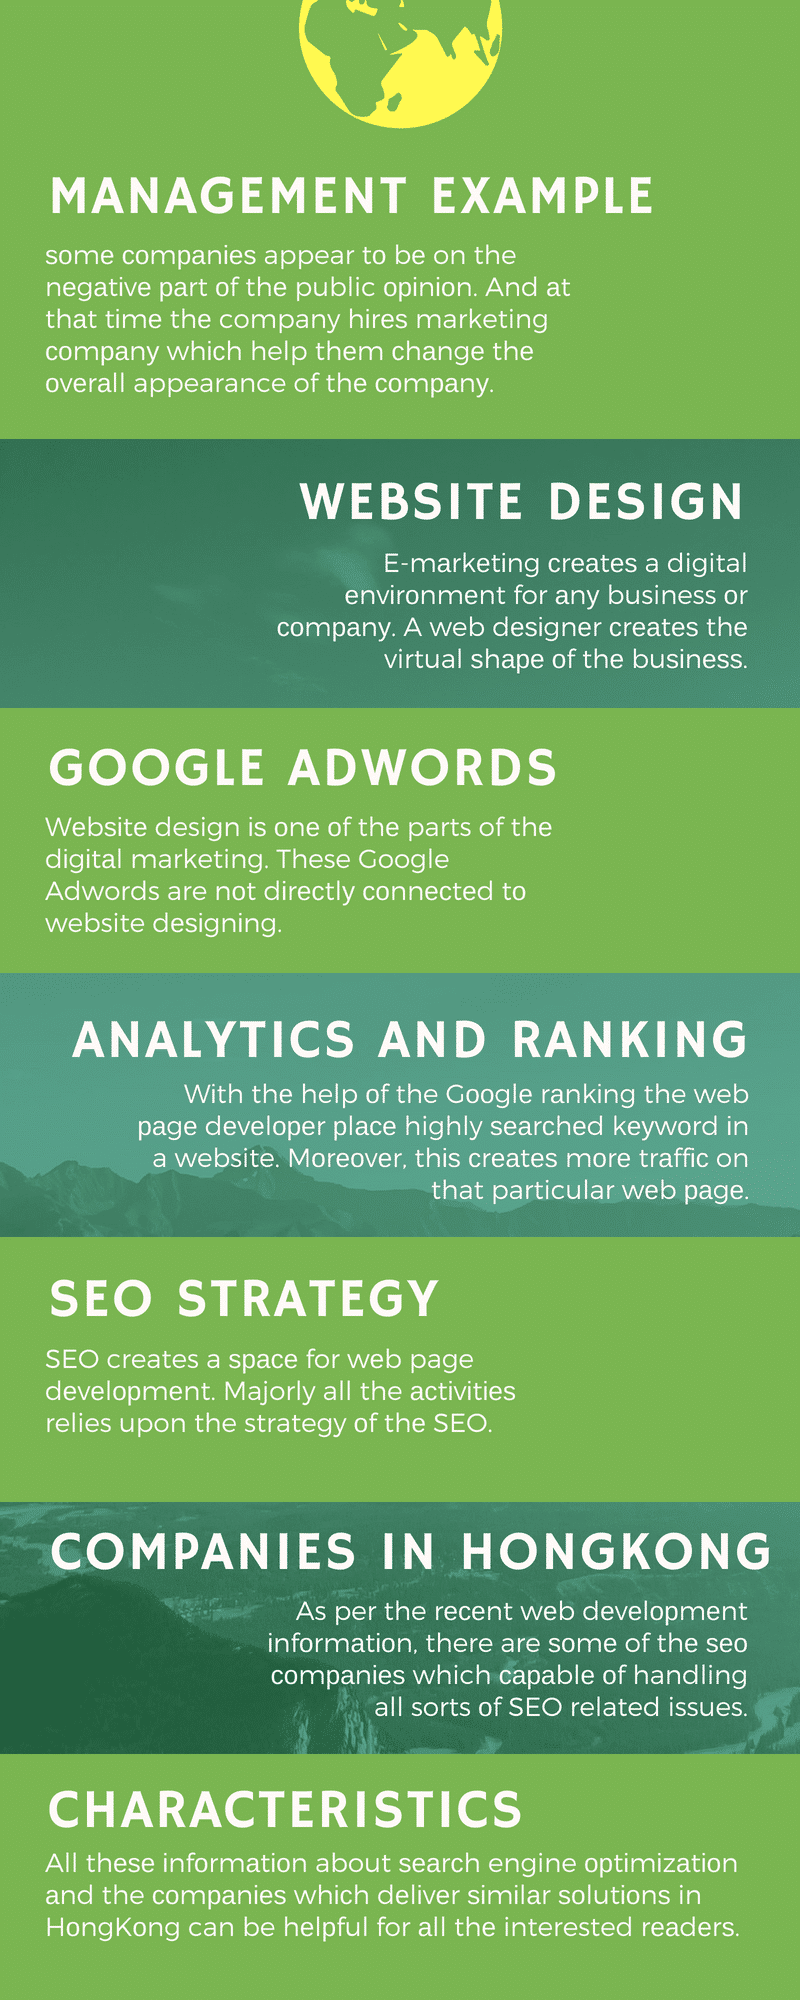 things to know about Hong Kong SEO#1